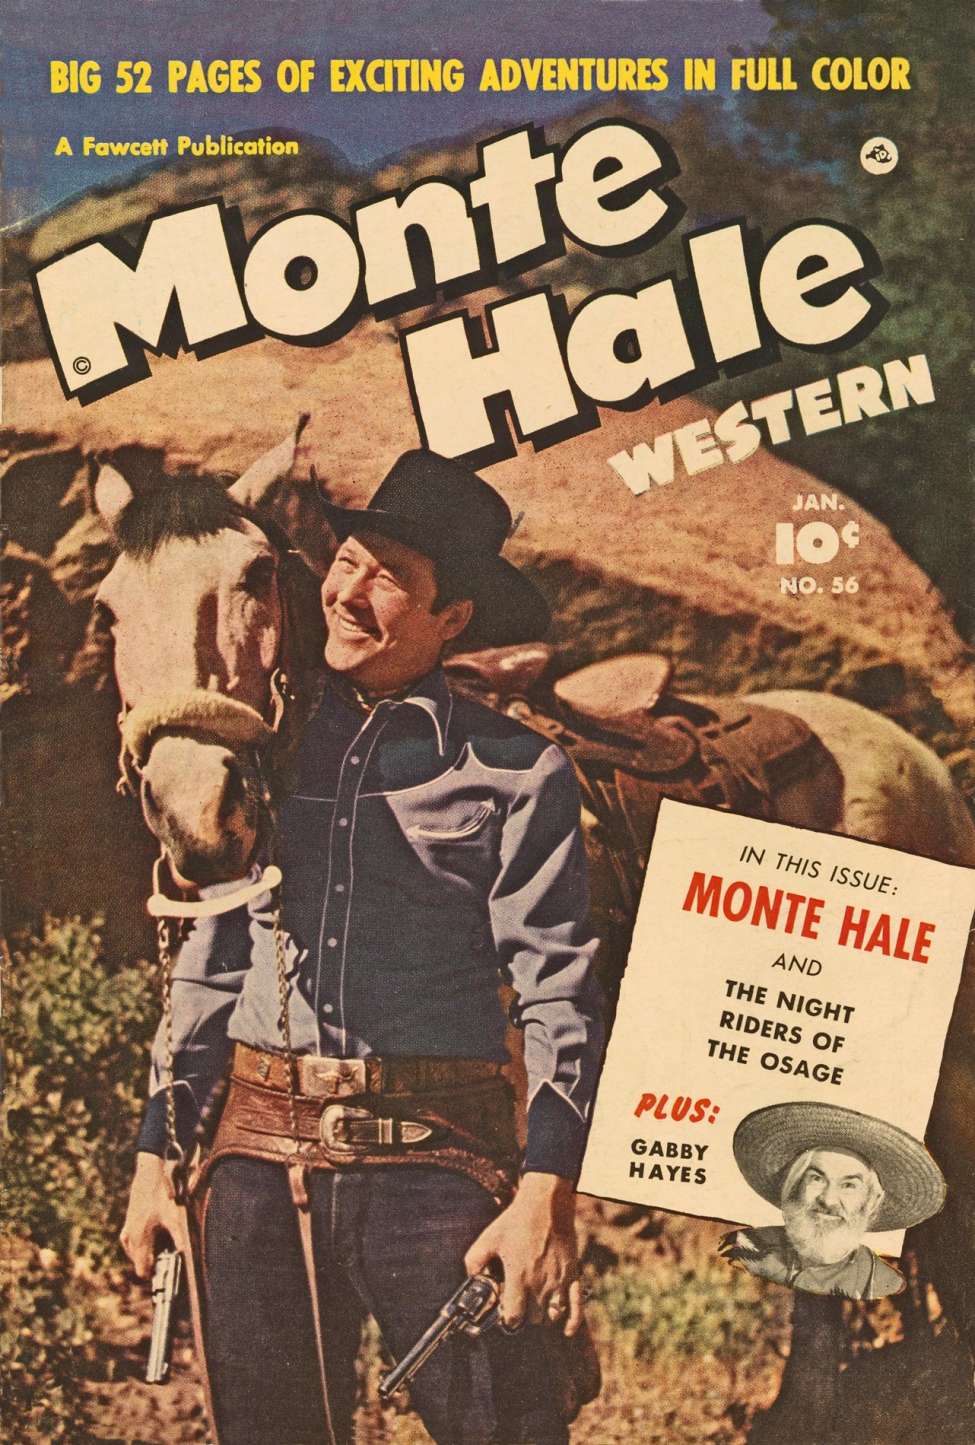 Comic Book Cover For Monte Hale Western 56 - Version 2